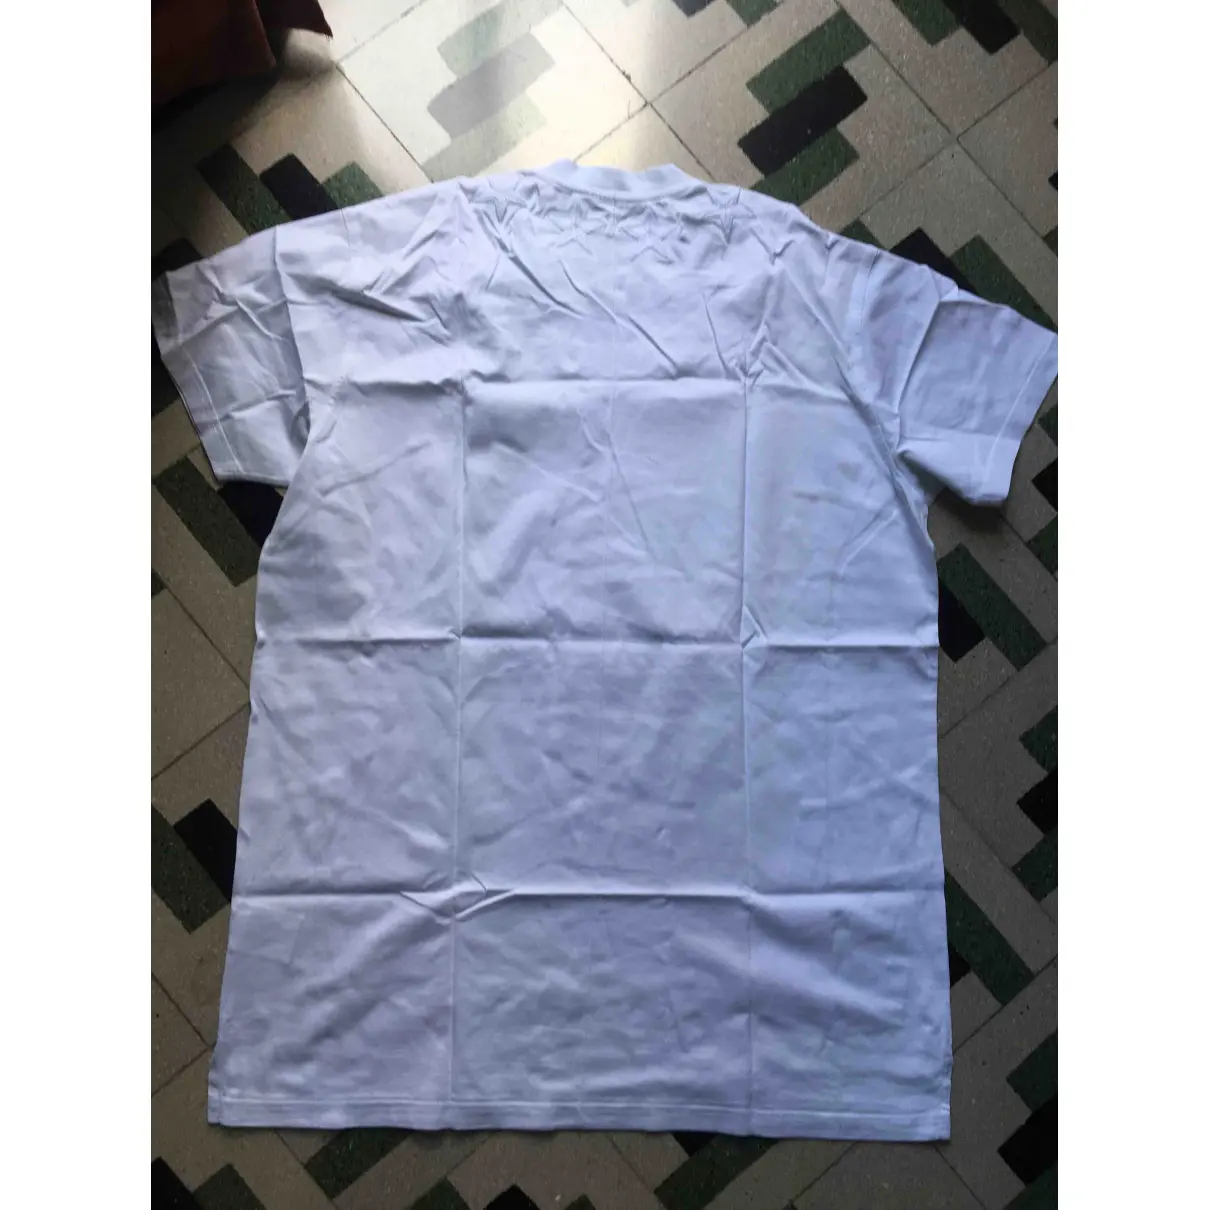 Buy Givenchy White Cotton T-shirt online